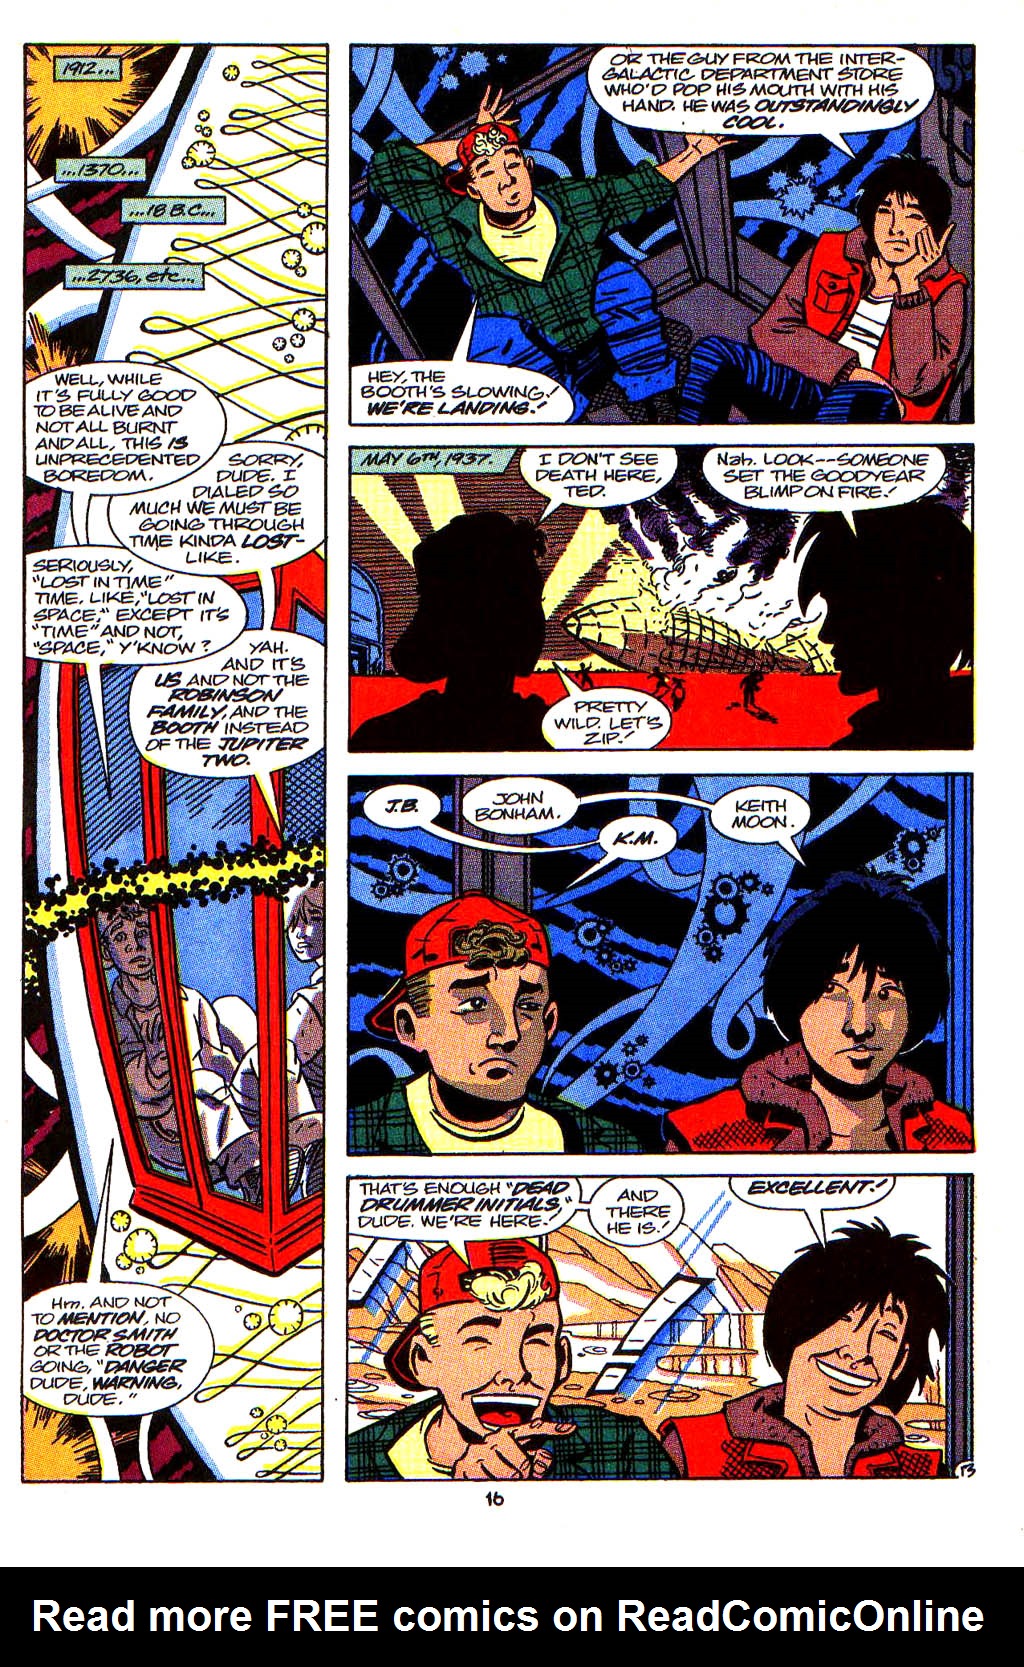 Read online Bill & Ted's Excellent Comic Book comic -  Issue #2 - 14